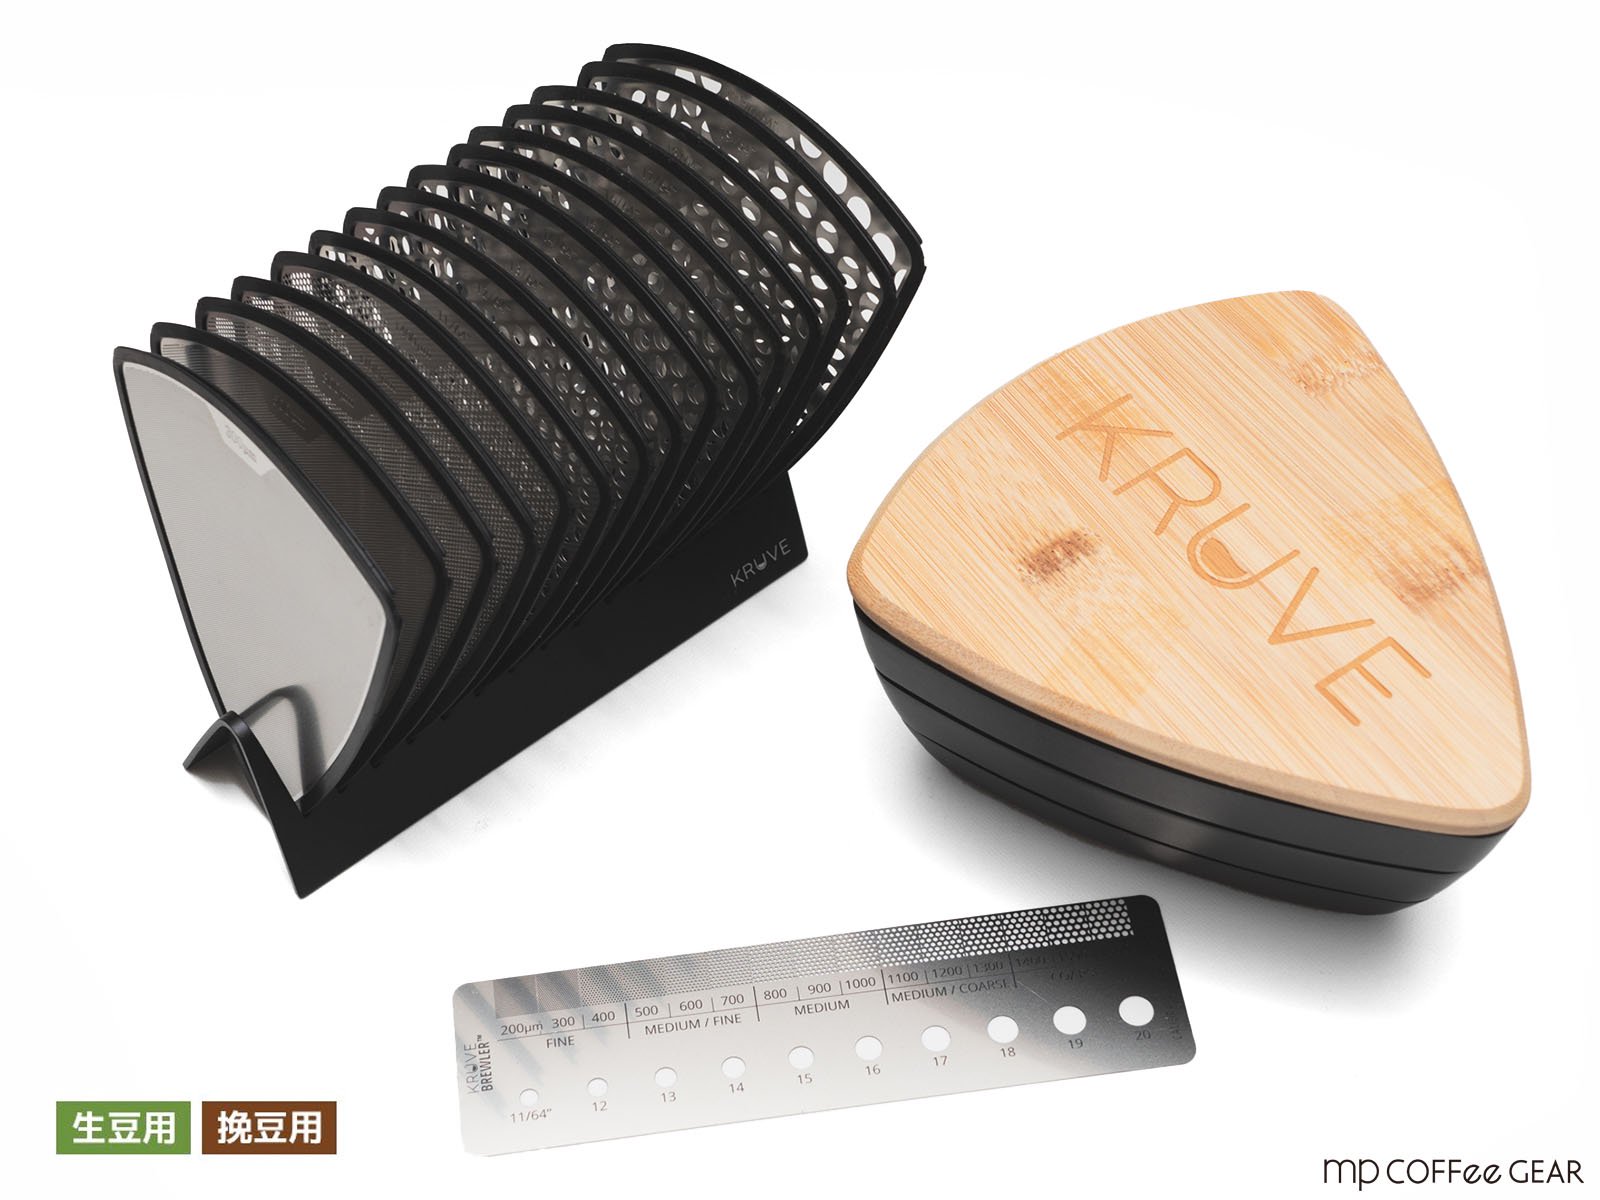 KRUVE（クルーヴ）Sifter PLUS Bean & Grind / Black [シフタープラス ビーン&グラインド / ブラック]<img class='new_mark_img2' src='https://img.shop-pro.jp/img/new/icons55.gif' style='border:none;display:inline;margin:0px;padding:0px;width:auto;' />